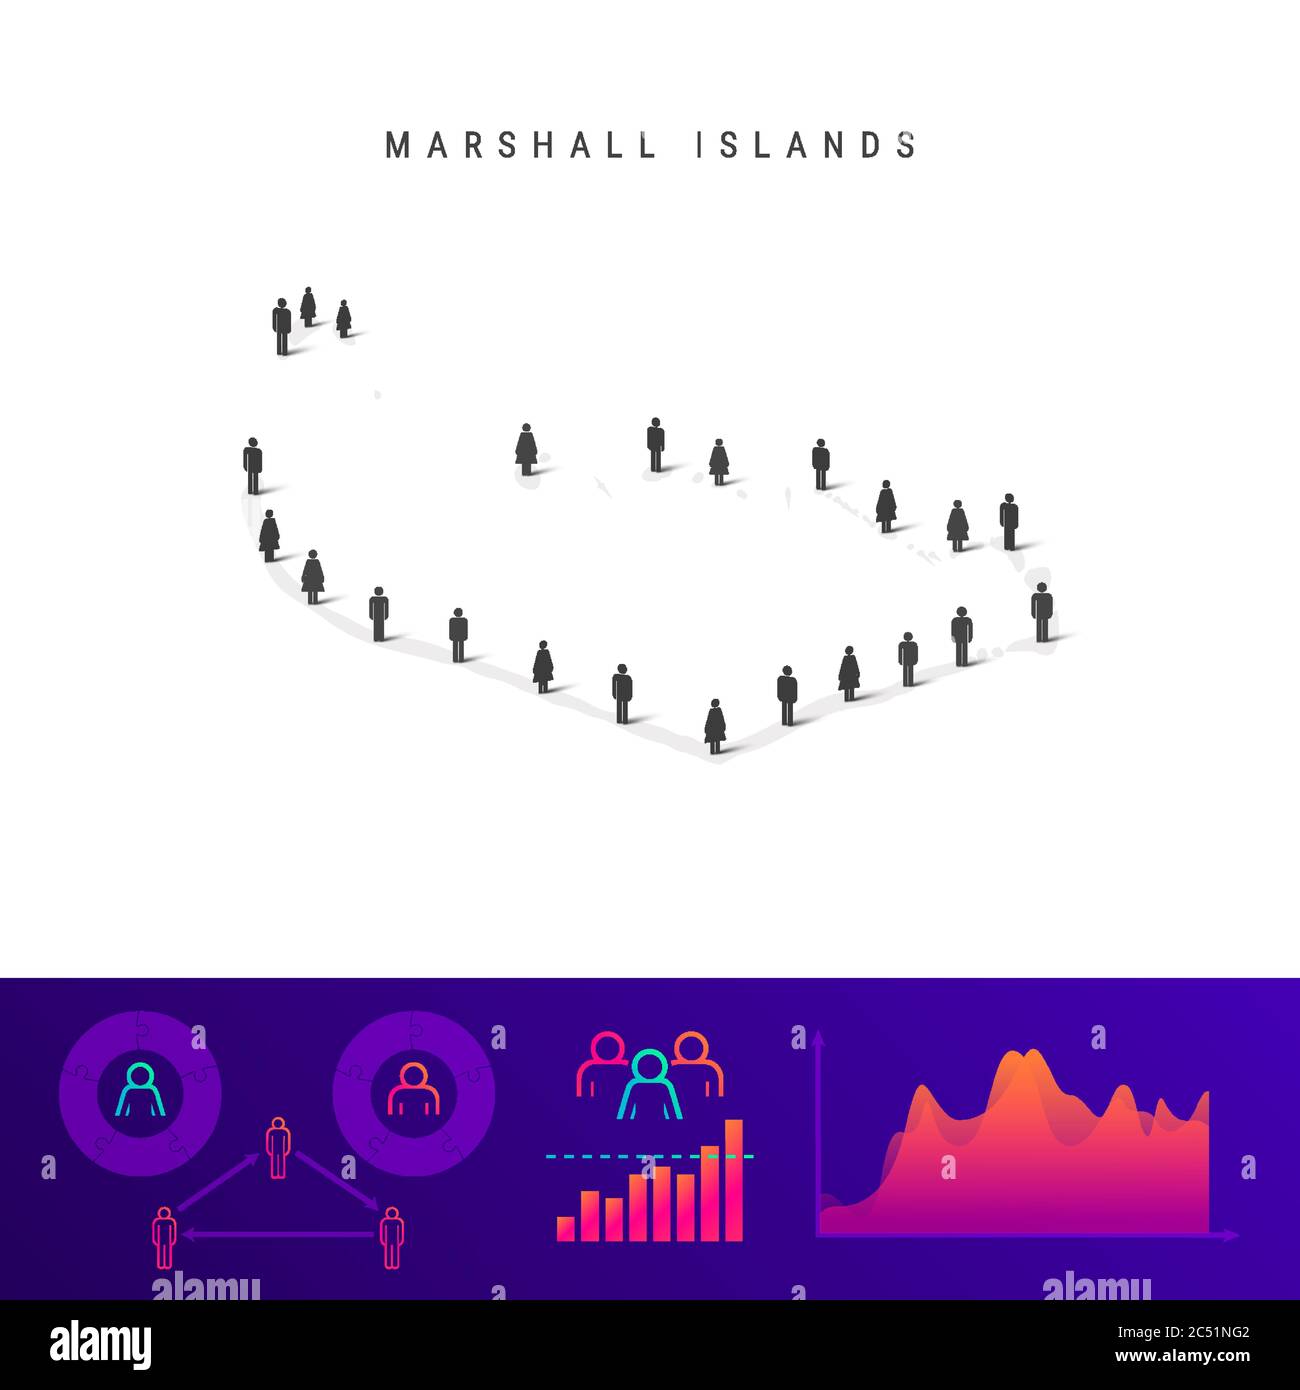 Marshall Islands people map. Detailed vector silhouette. Mixed crowd of men and women icons. Population infographic elements. Vector illustration isol Stock Vector